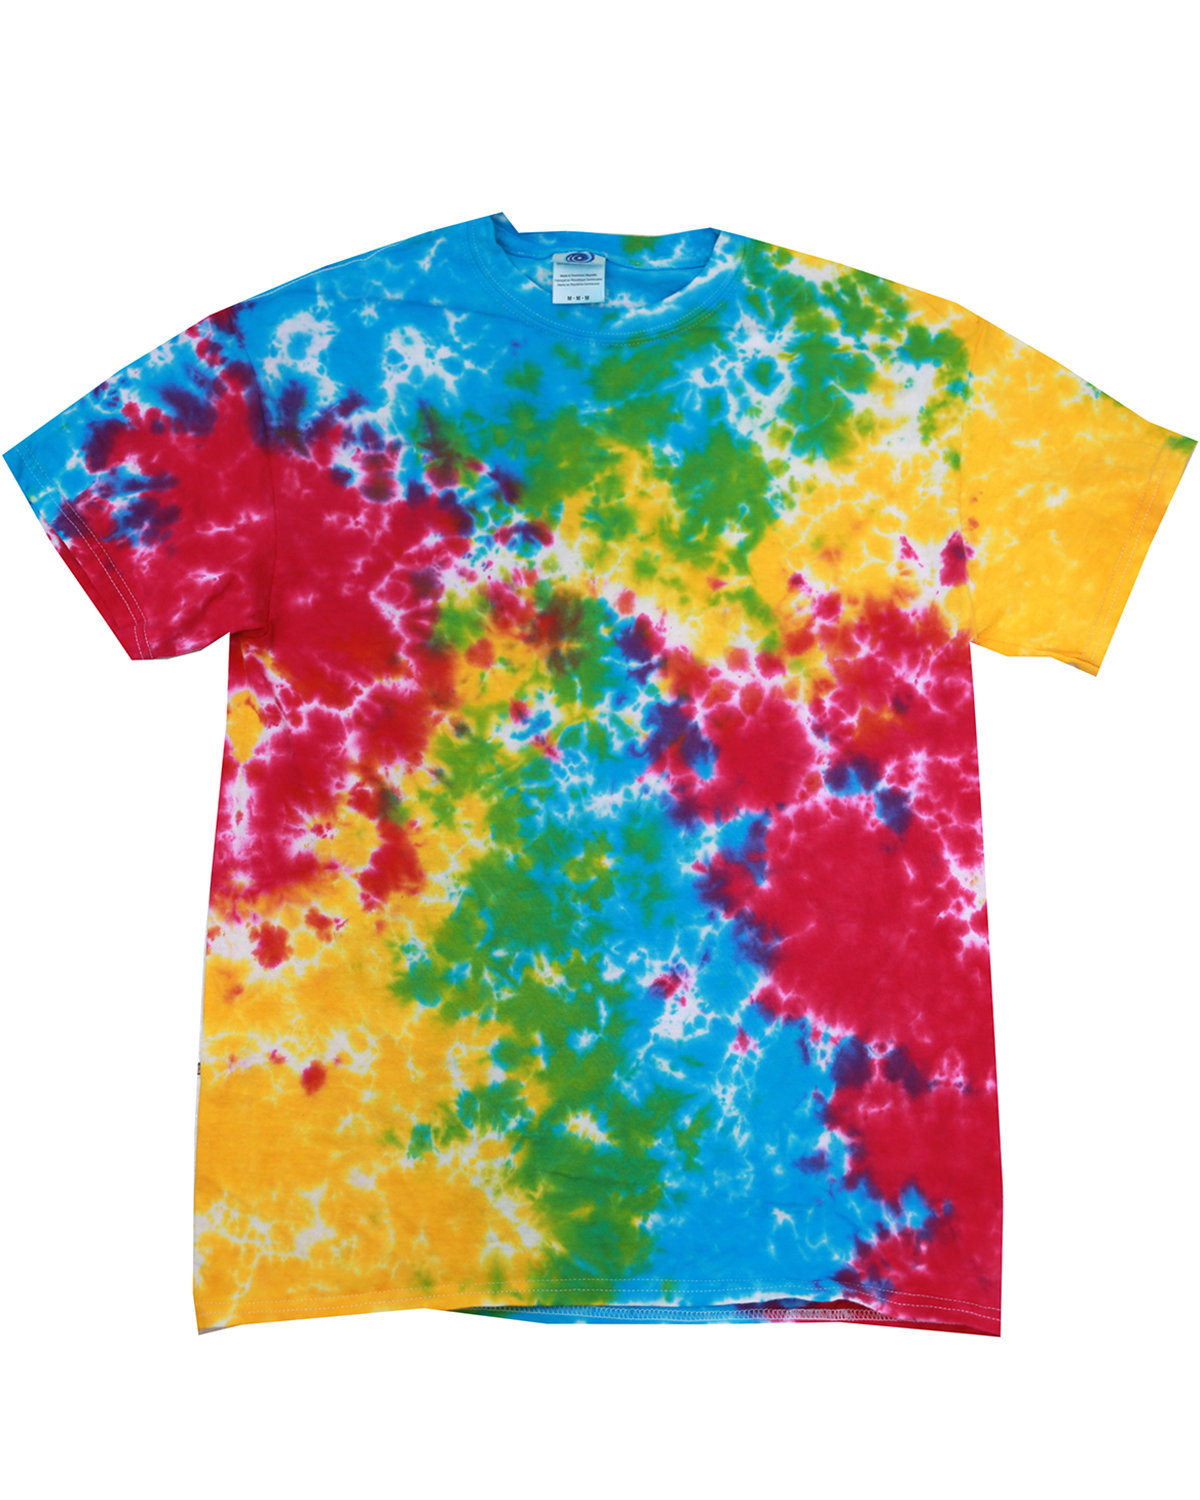 Siaonvr 68 Pieces DIY T-Shirt Fabrics Tie-Dye Kits for Kids Adult Party Group, Adult Unisex, Size: One size, White